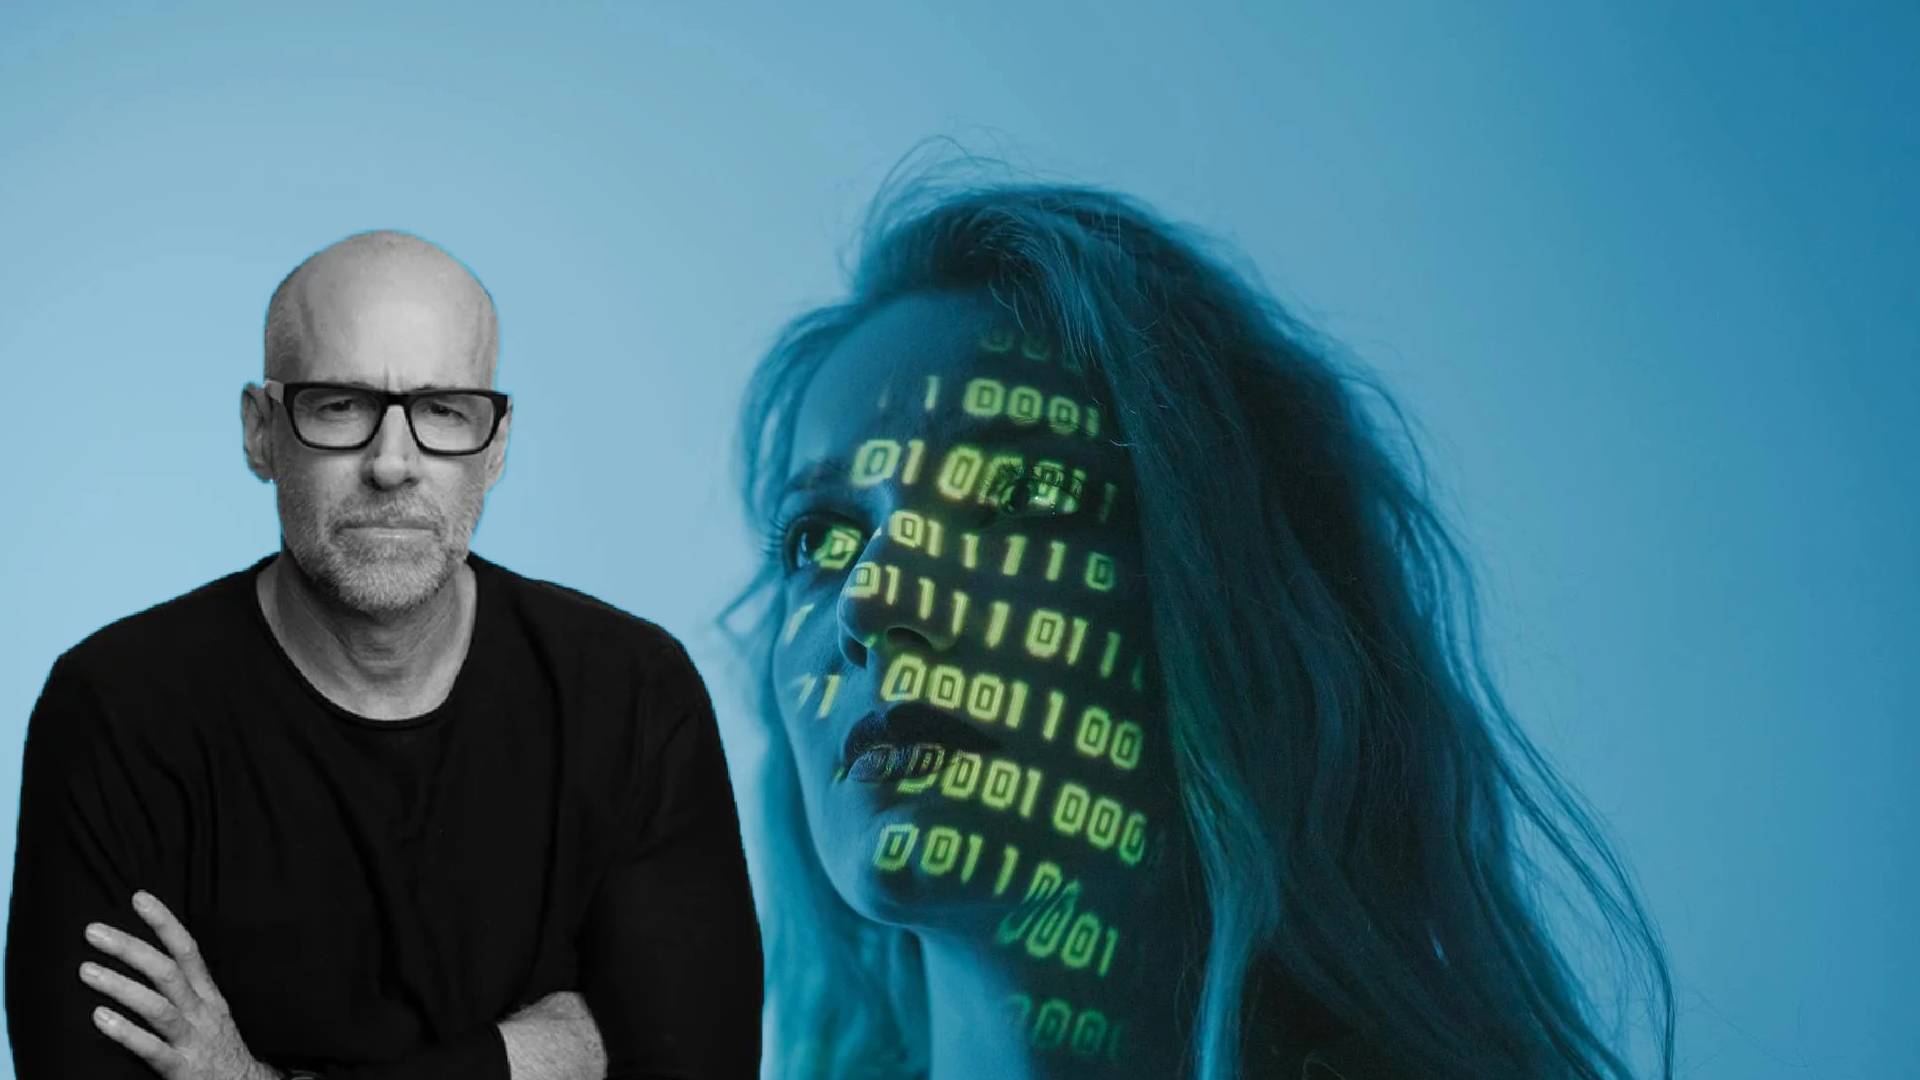 Millionaire Founder Reveals The Number One Skill Essential In The Age Of AI; It Is Not Coding But… [Video]